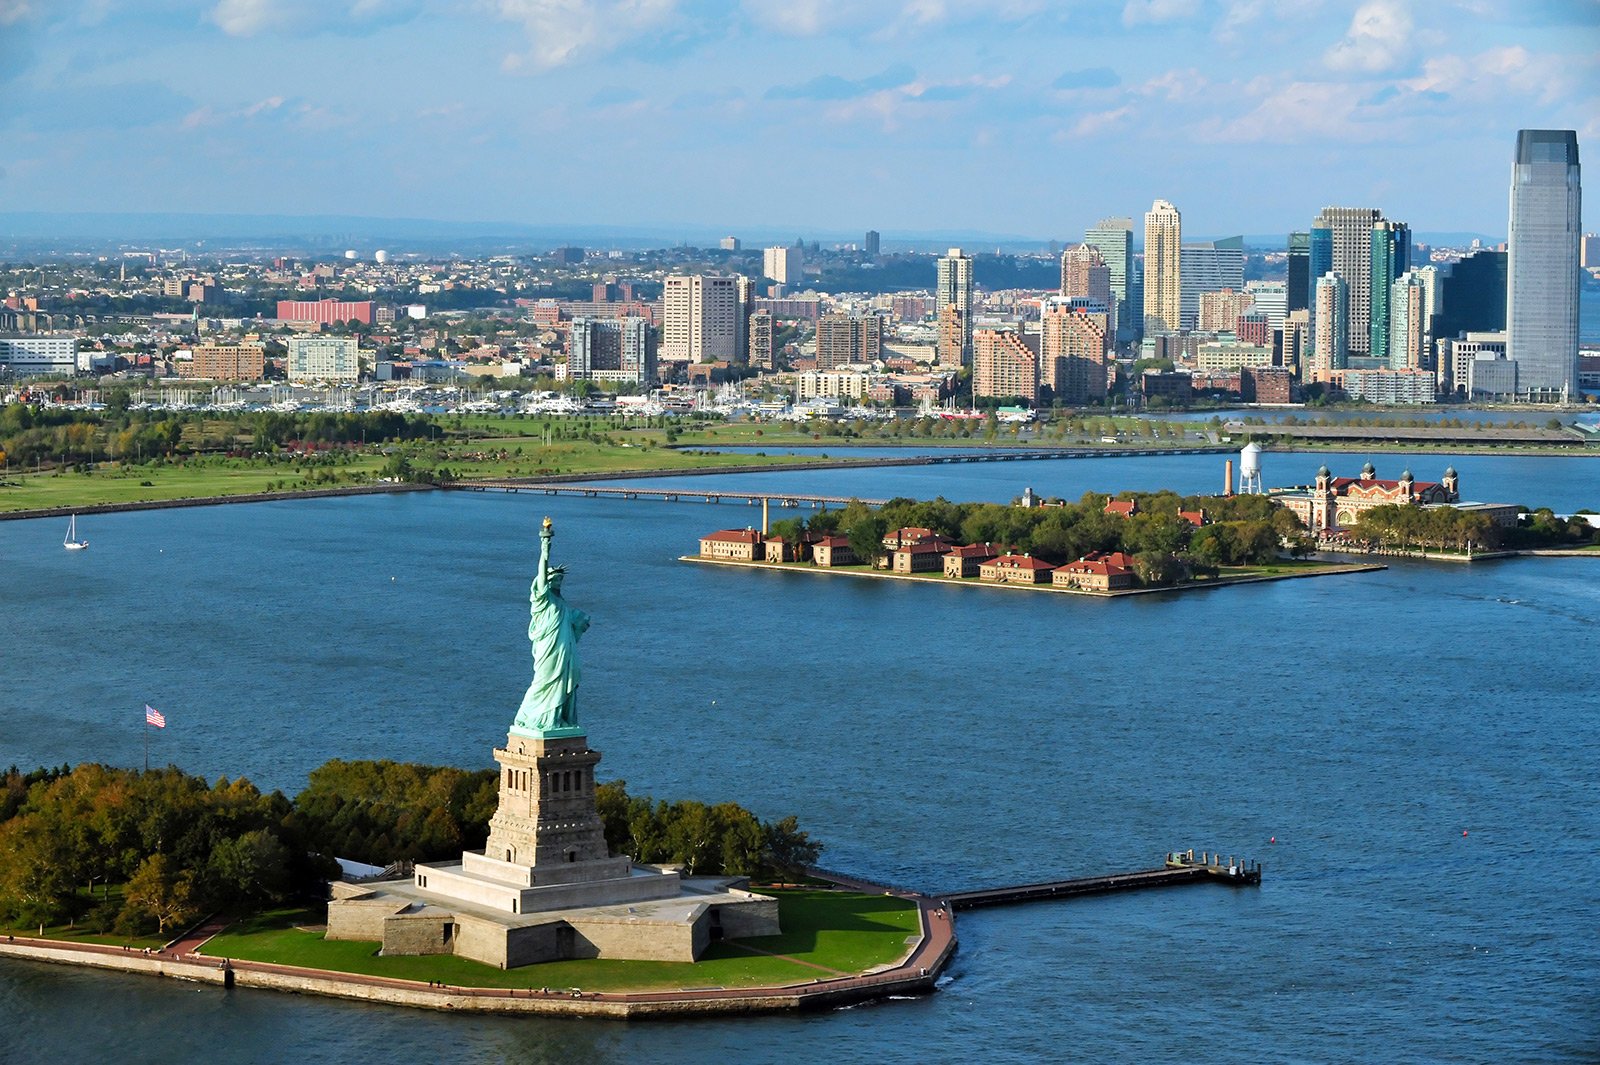 The Statue Of Liberty, New York